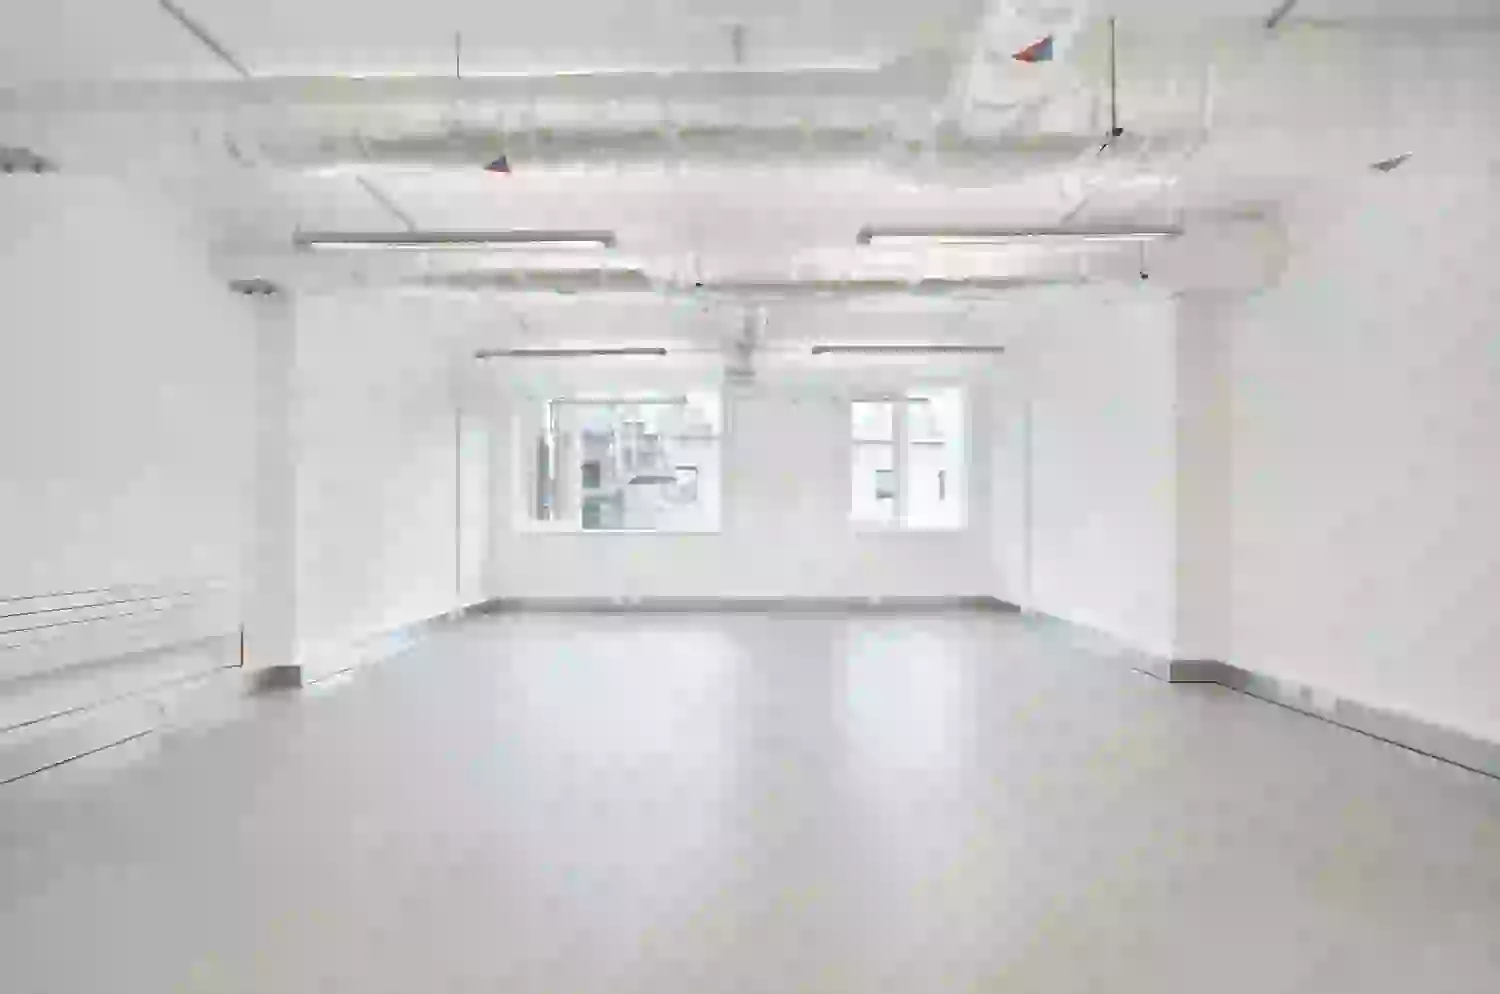 Office space to rent at The Light Bulb, 1 Filament Walk, Wandsworth, London, unit LU.304, 698 sq ft (64 sq m).